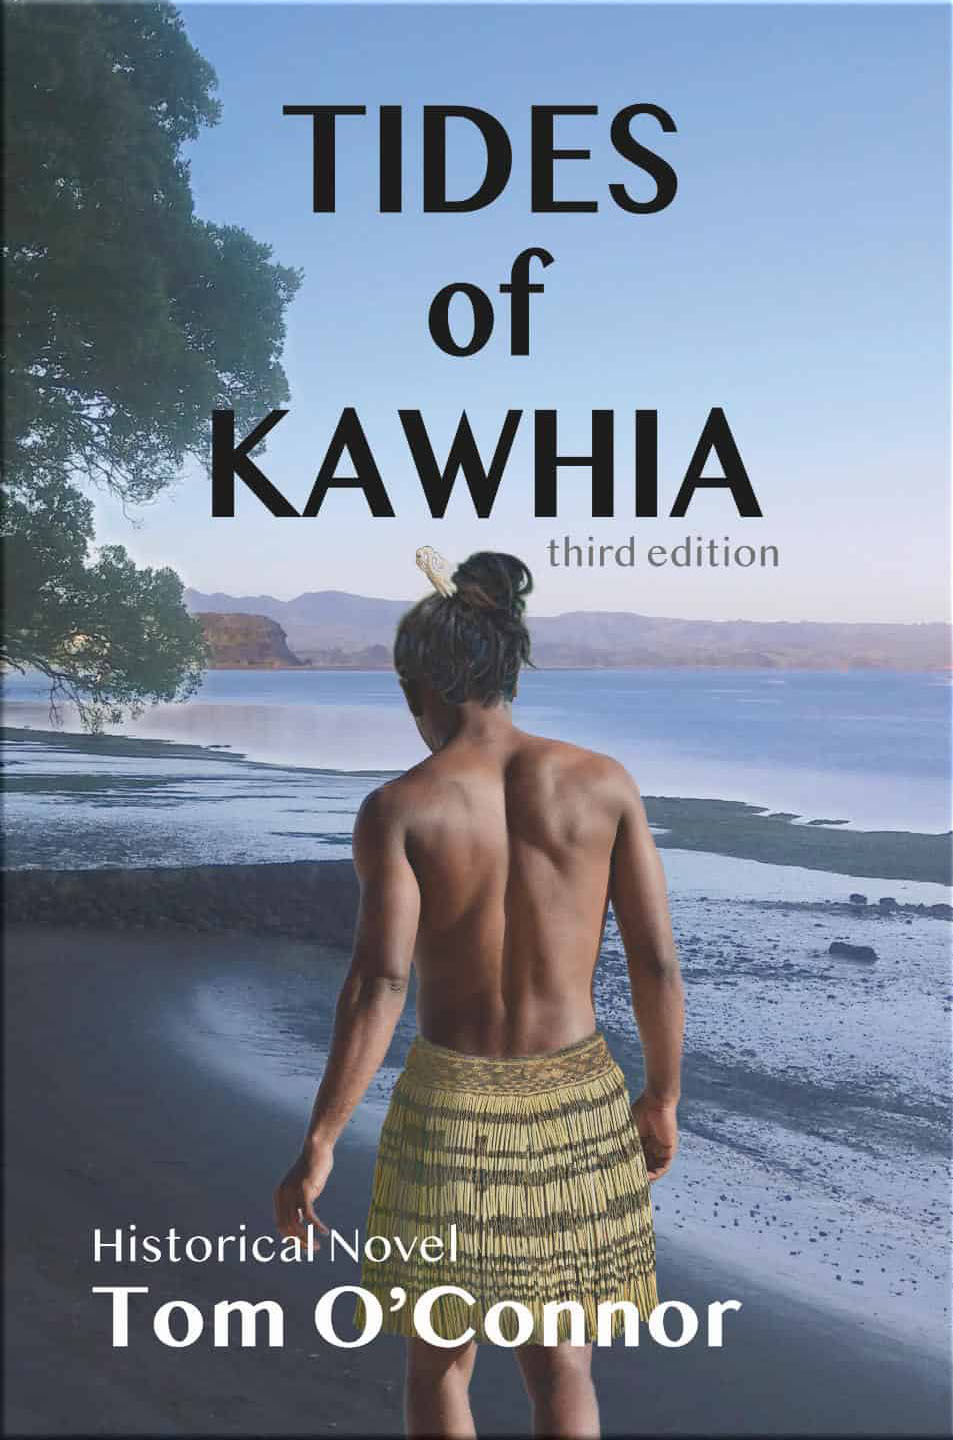 Tides of Kawhia by Tom OConnor book cover<br />
